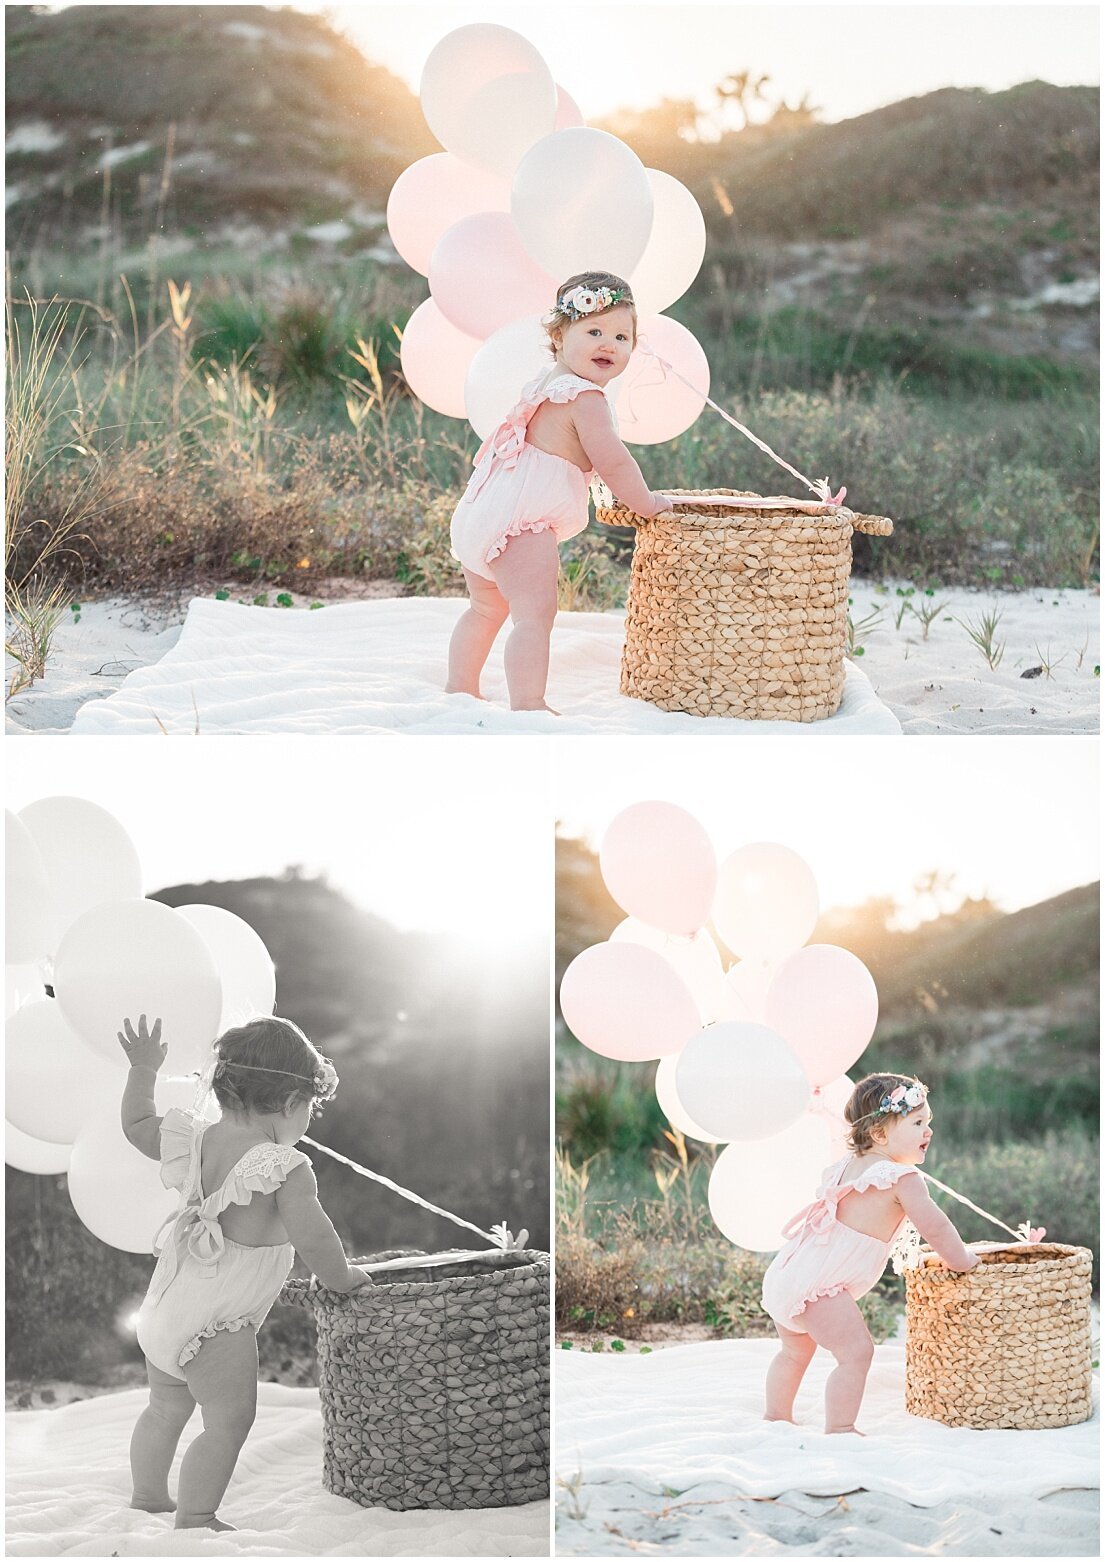 birst birthday picture ideas with balloons and a basket